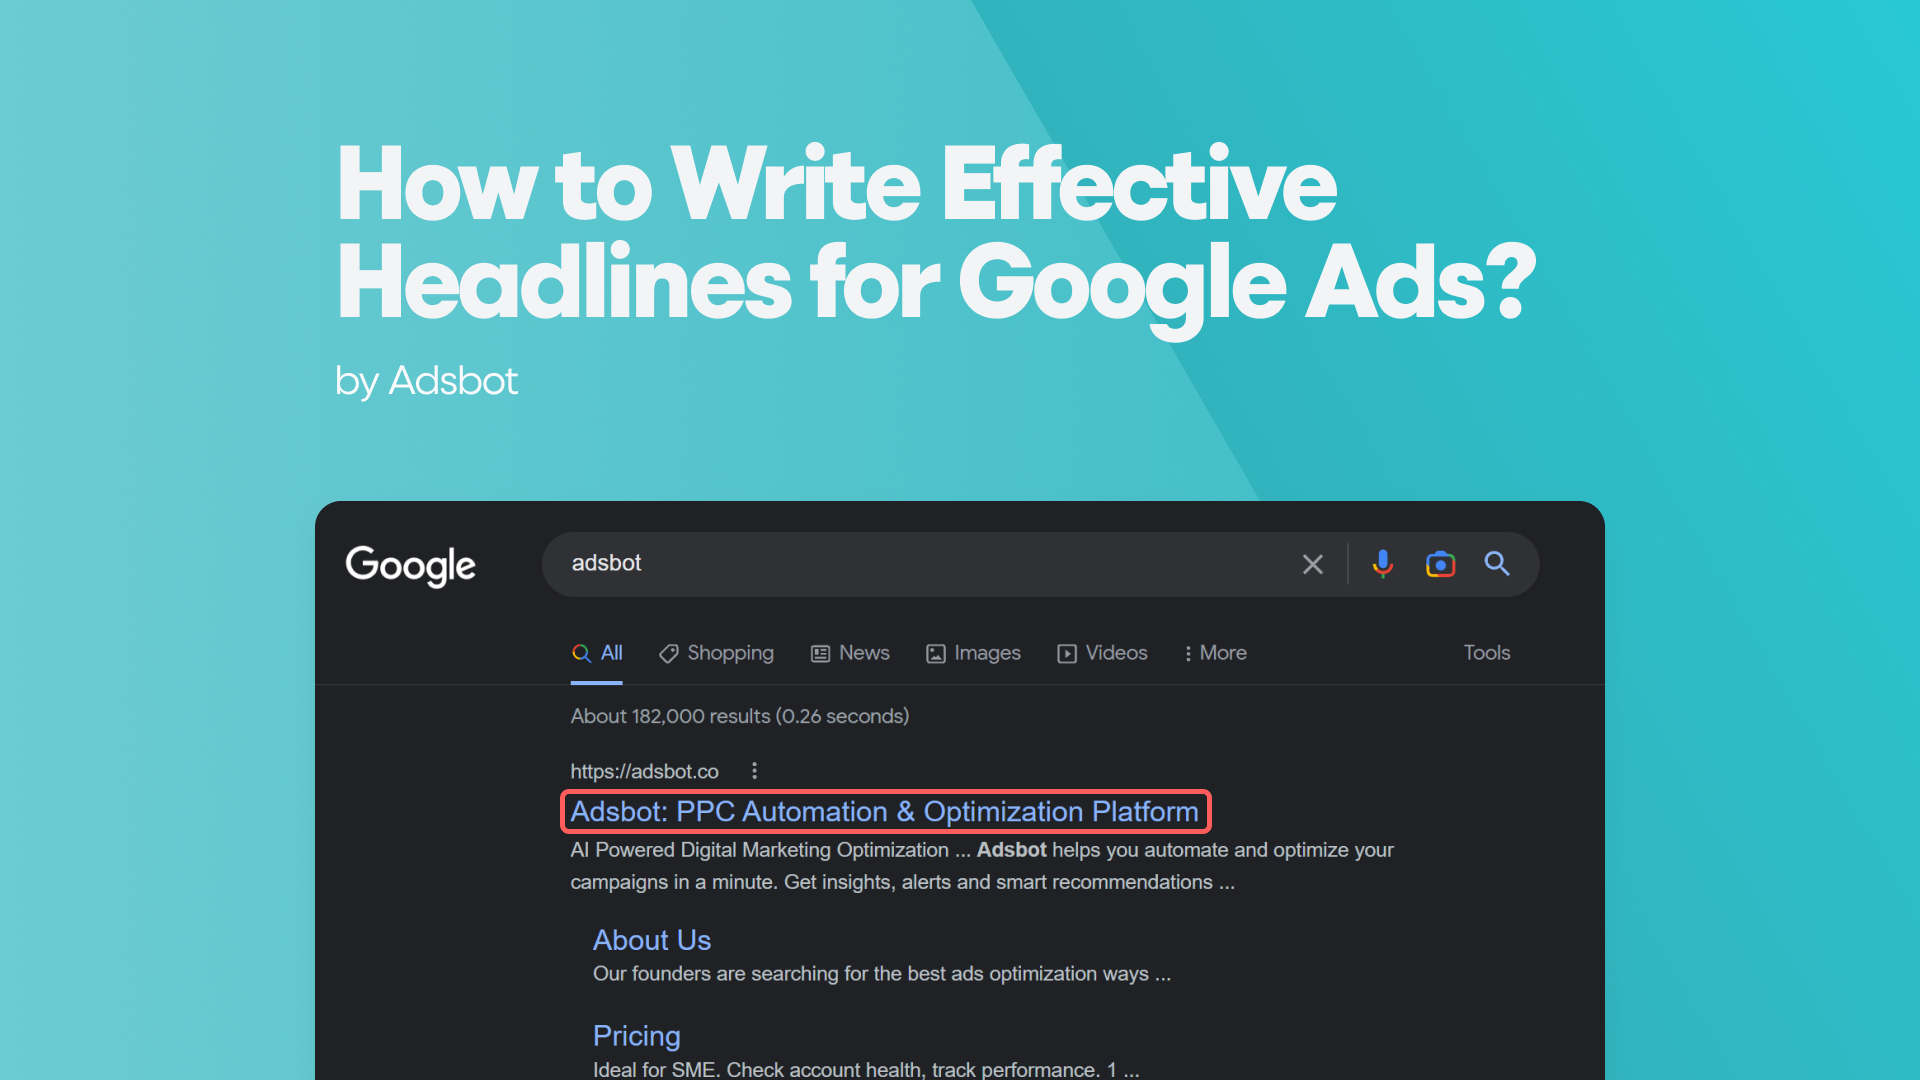 How to Write Effective Headlines for Google Ads?